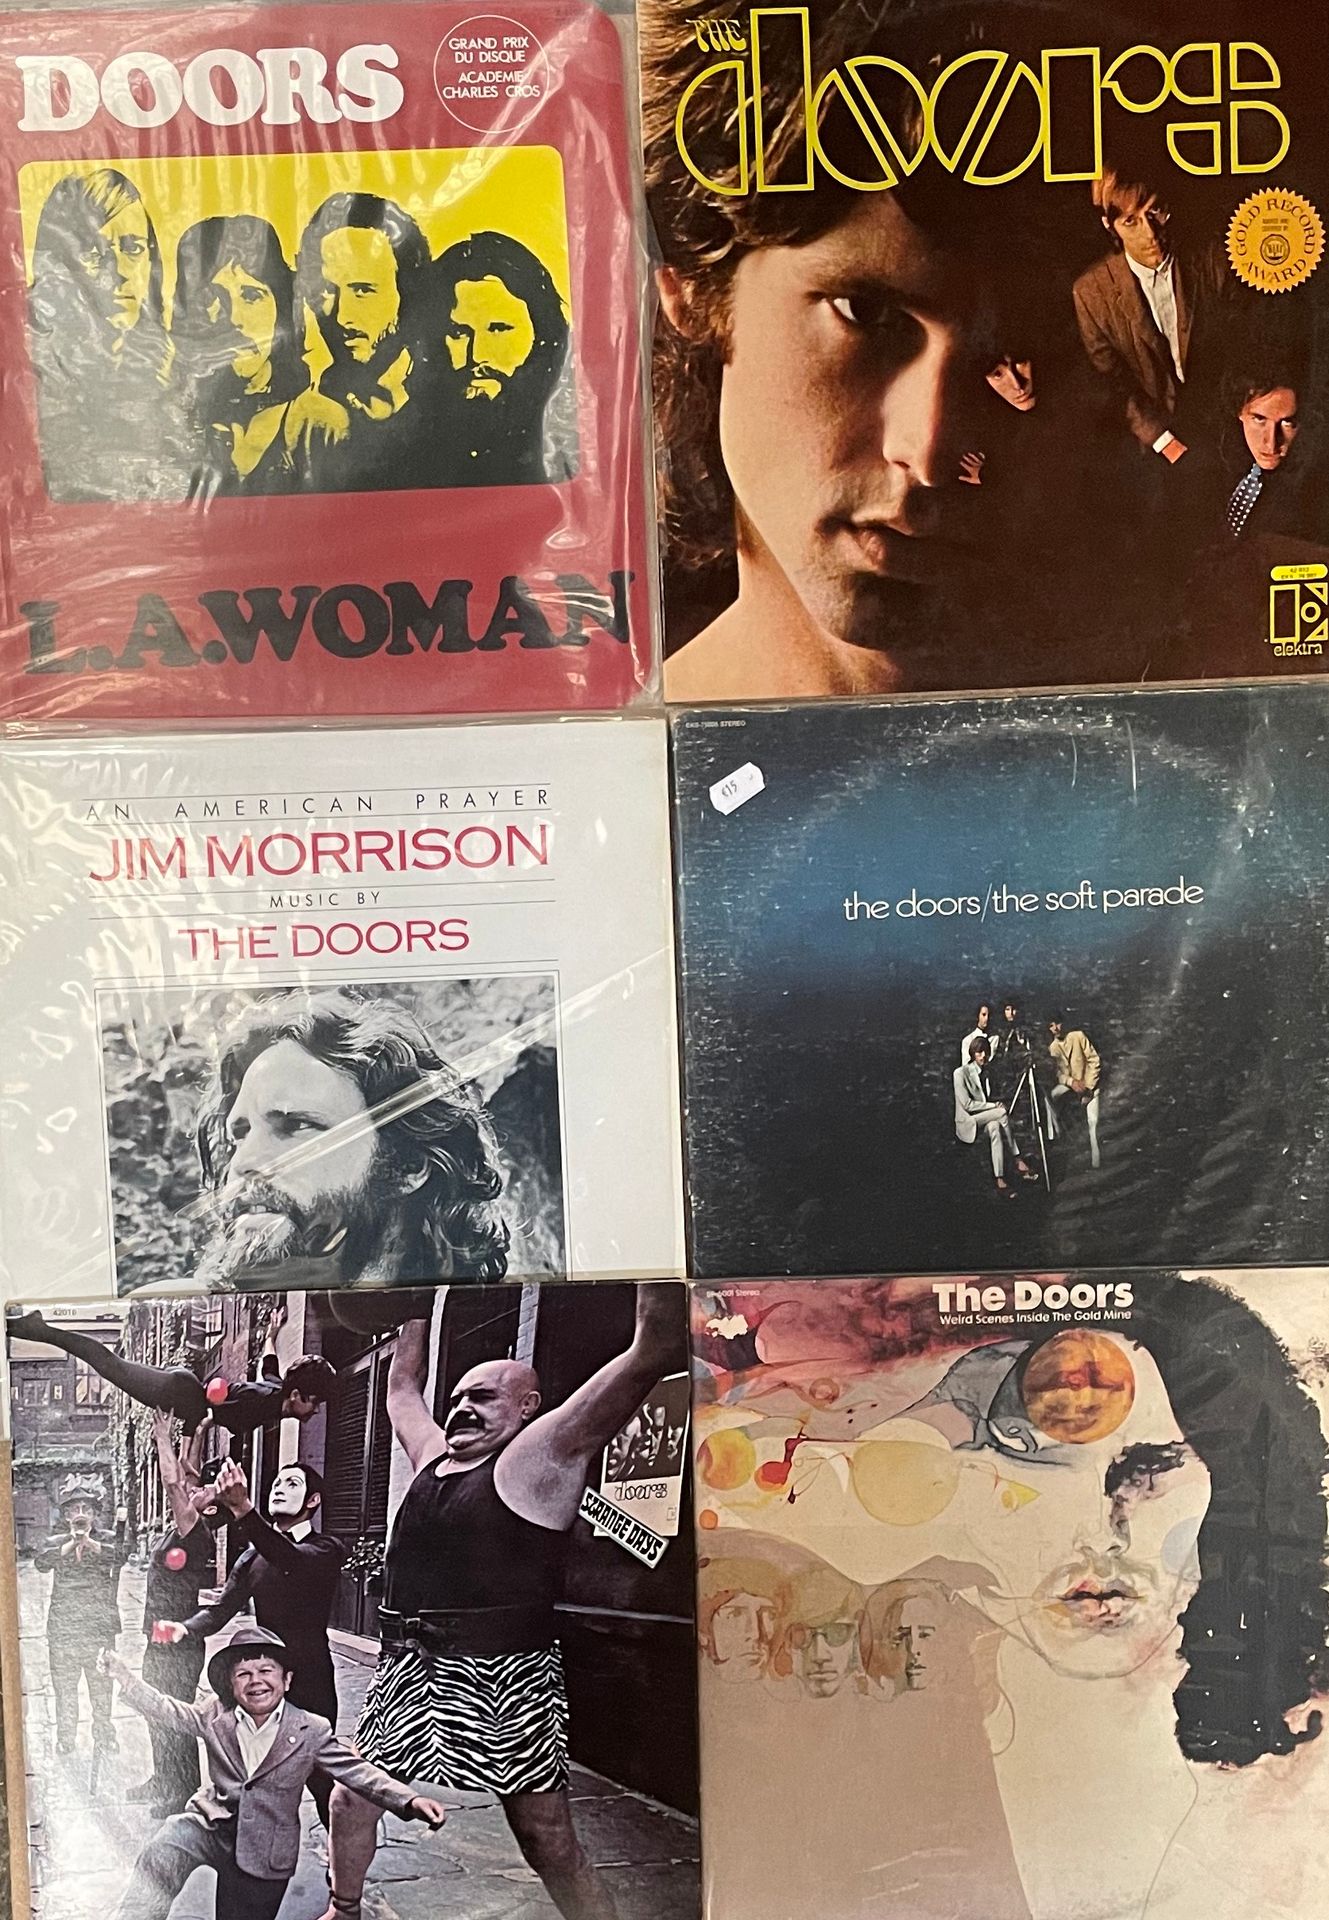 Null Six LPs - The Doors

VG to EX; VG to EX